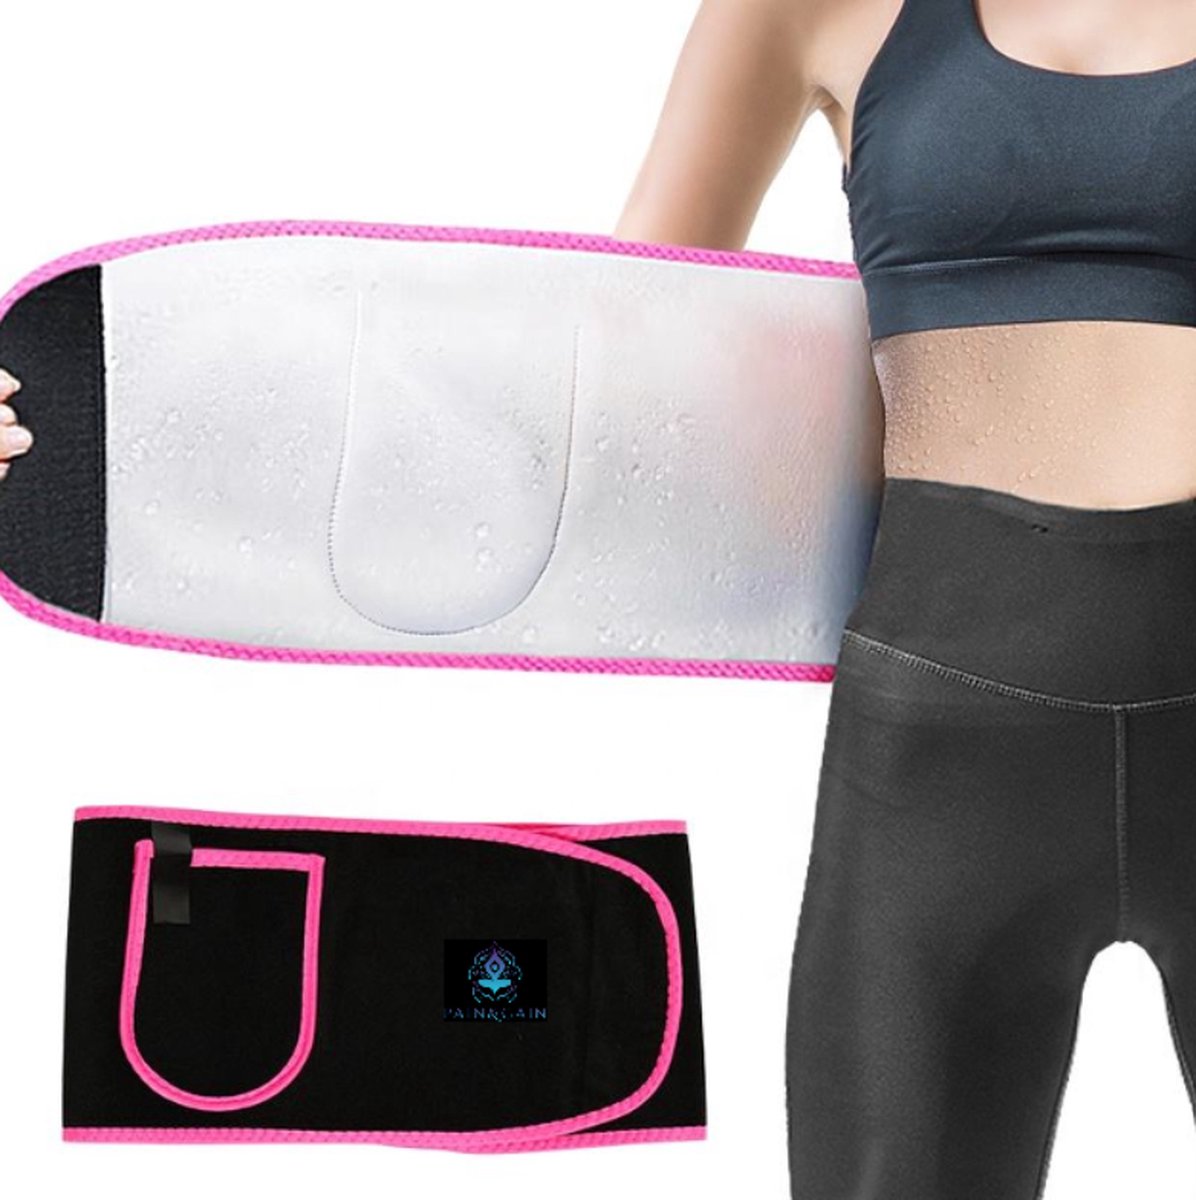 Pain&Gain buik riem taille trainer - corset - Waist Trainer - Entraîneur de taille - for Men Women Weight Loss Waist Trimmer for Home Gym and Workout Easy to Clean Sweatband Slim Body